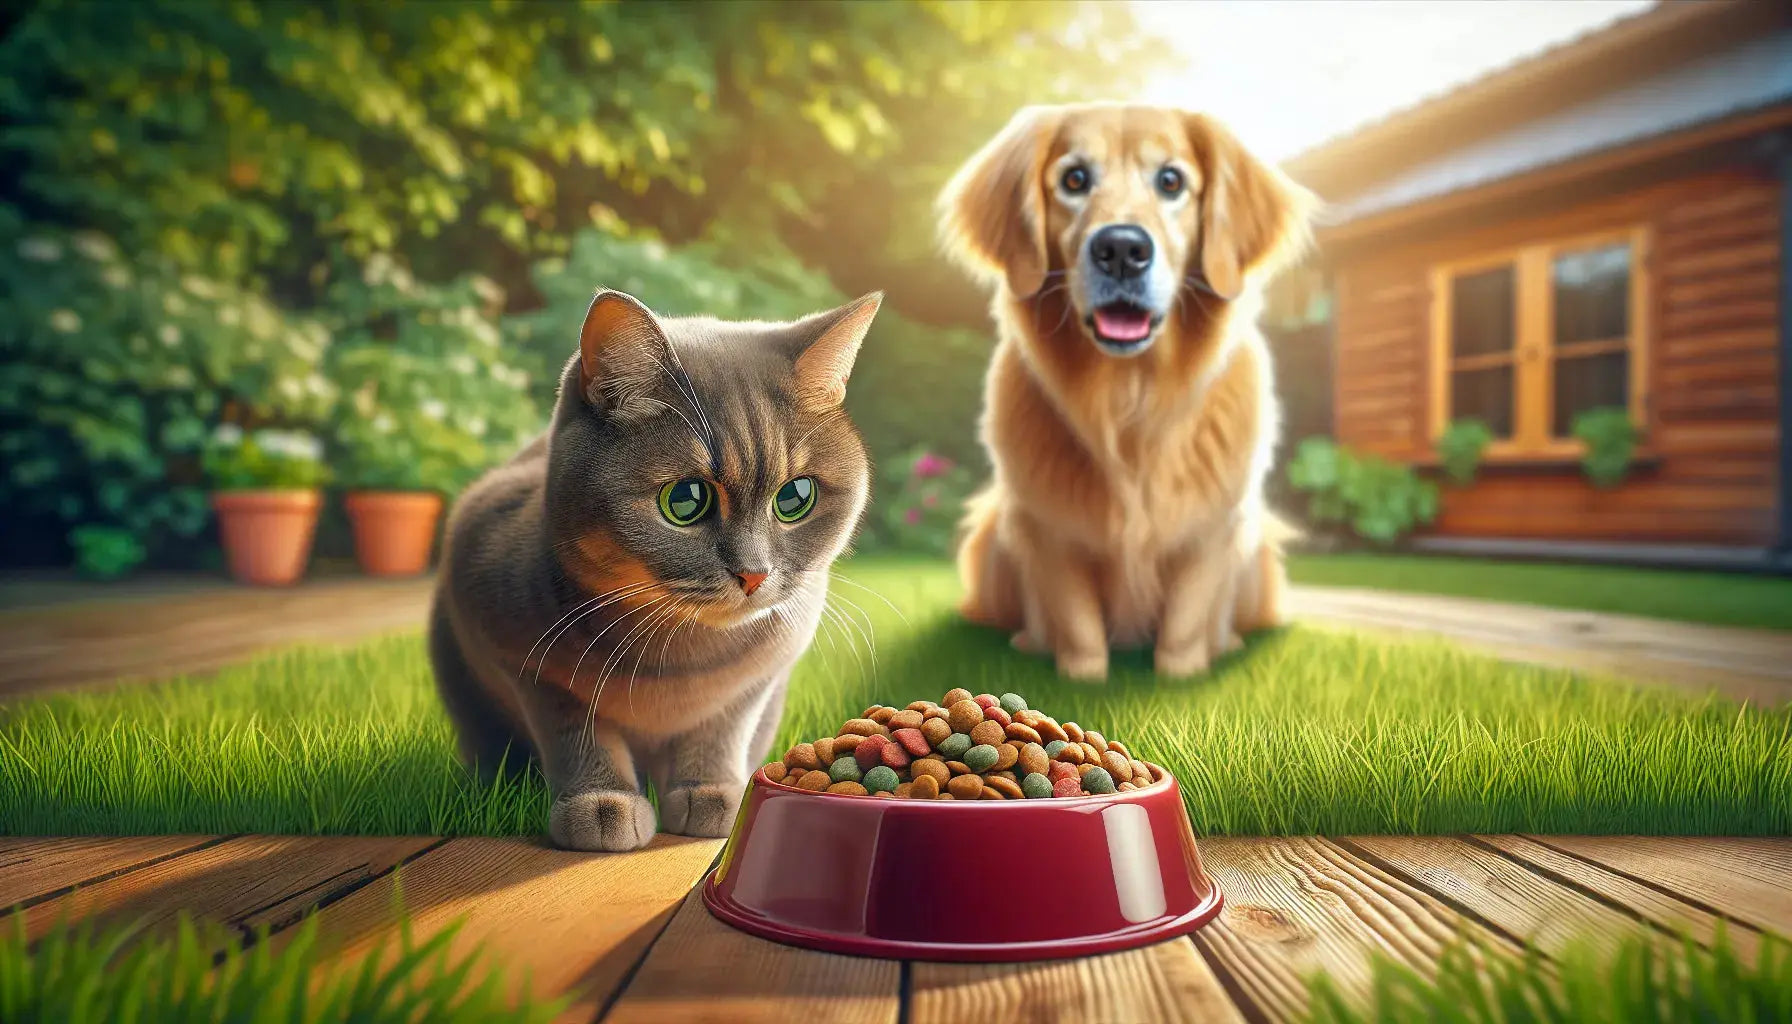 Why Can Cats Eat Dog Food? Explained